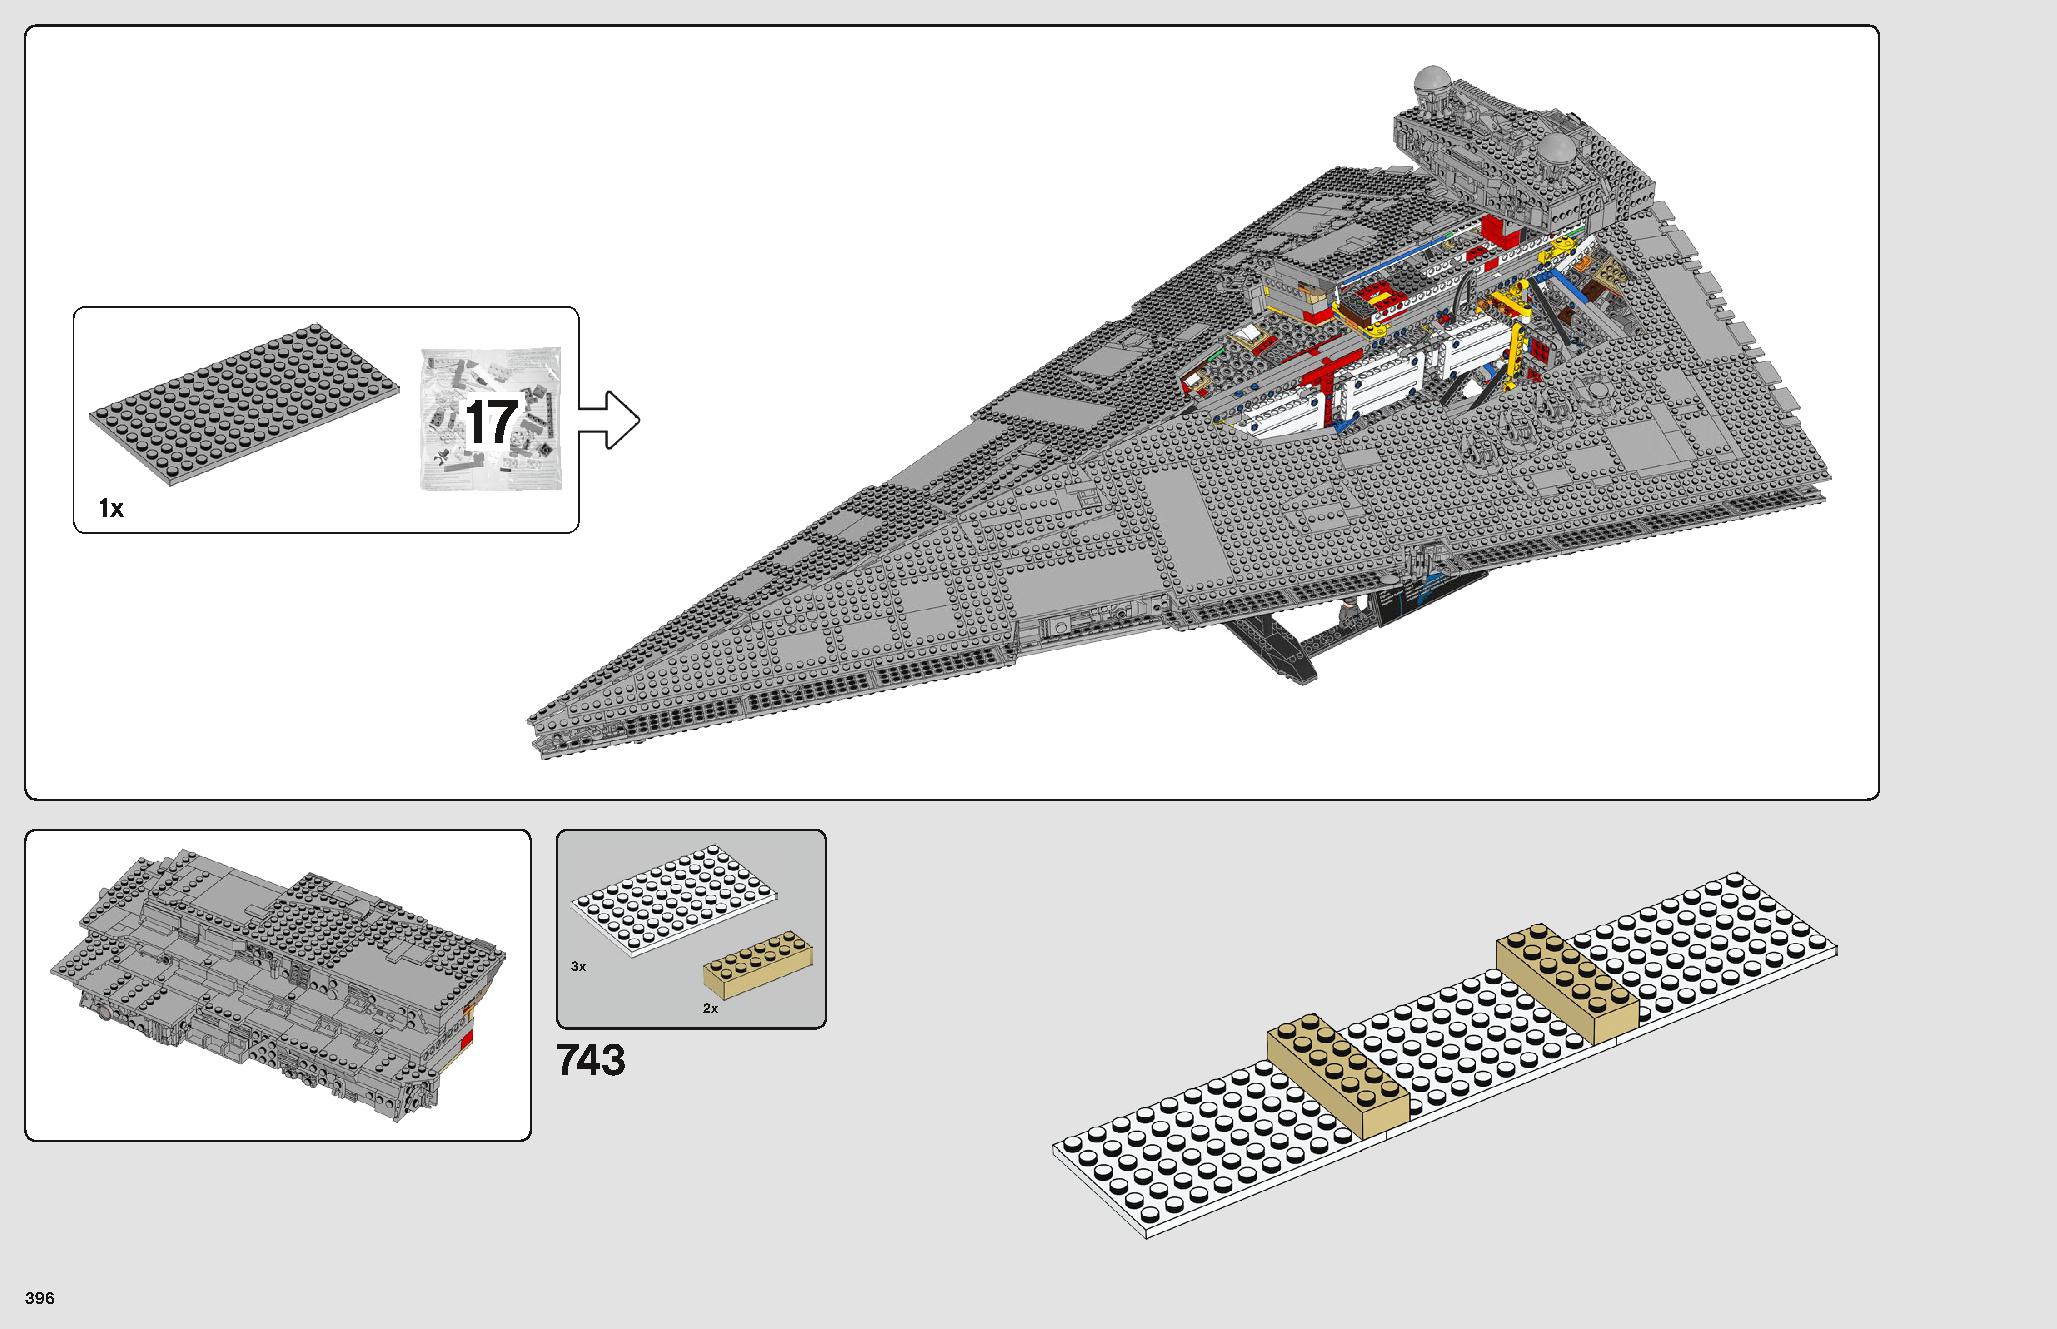 Imperial Star Destroyer 75252 レゴの商品情報 レゴの説明書・組立方法 396 page